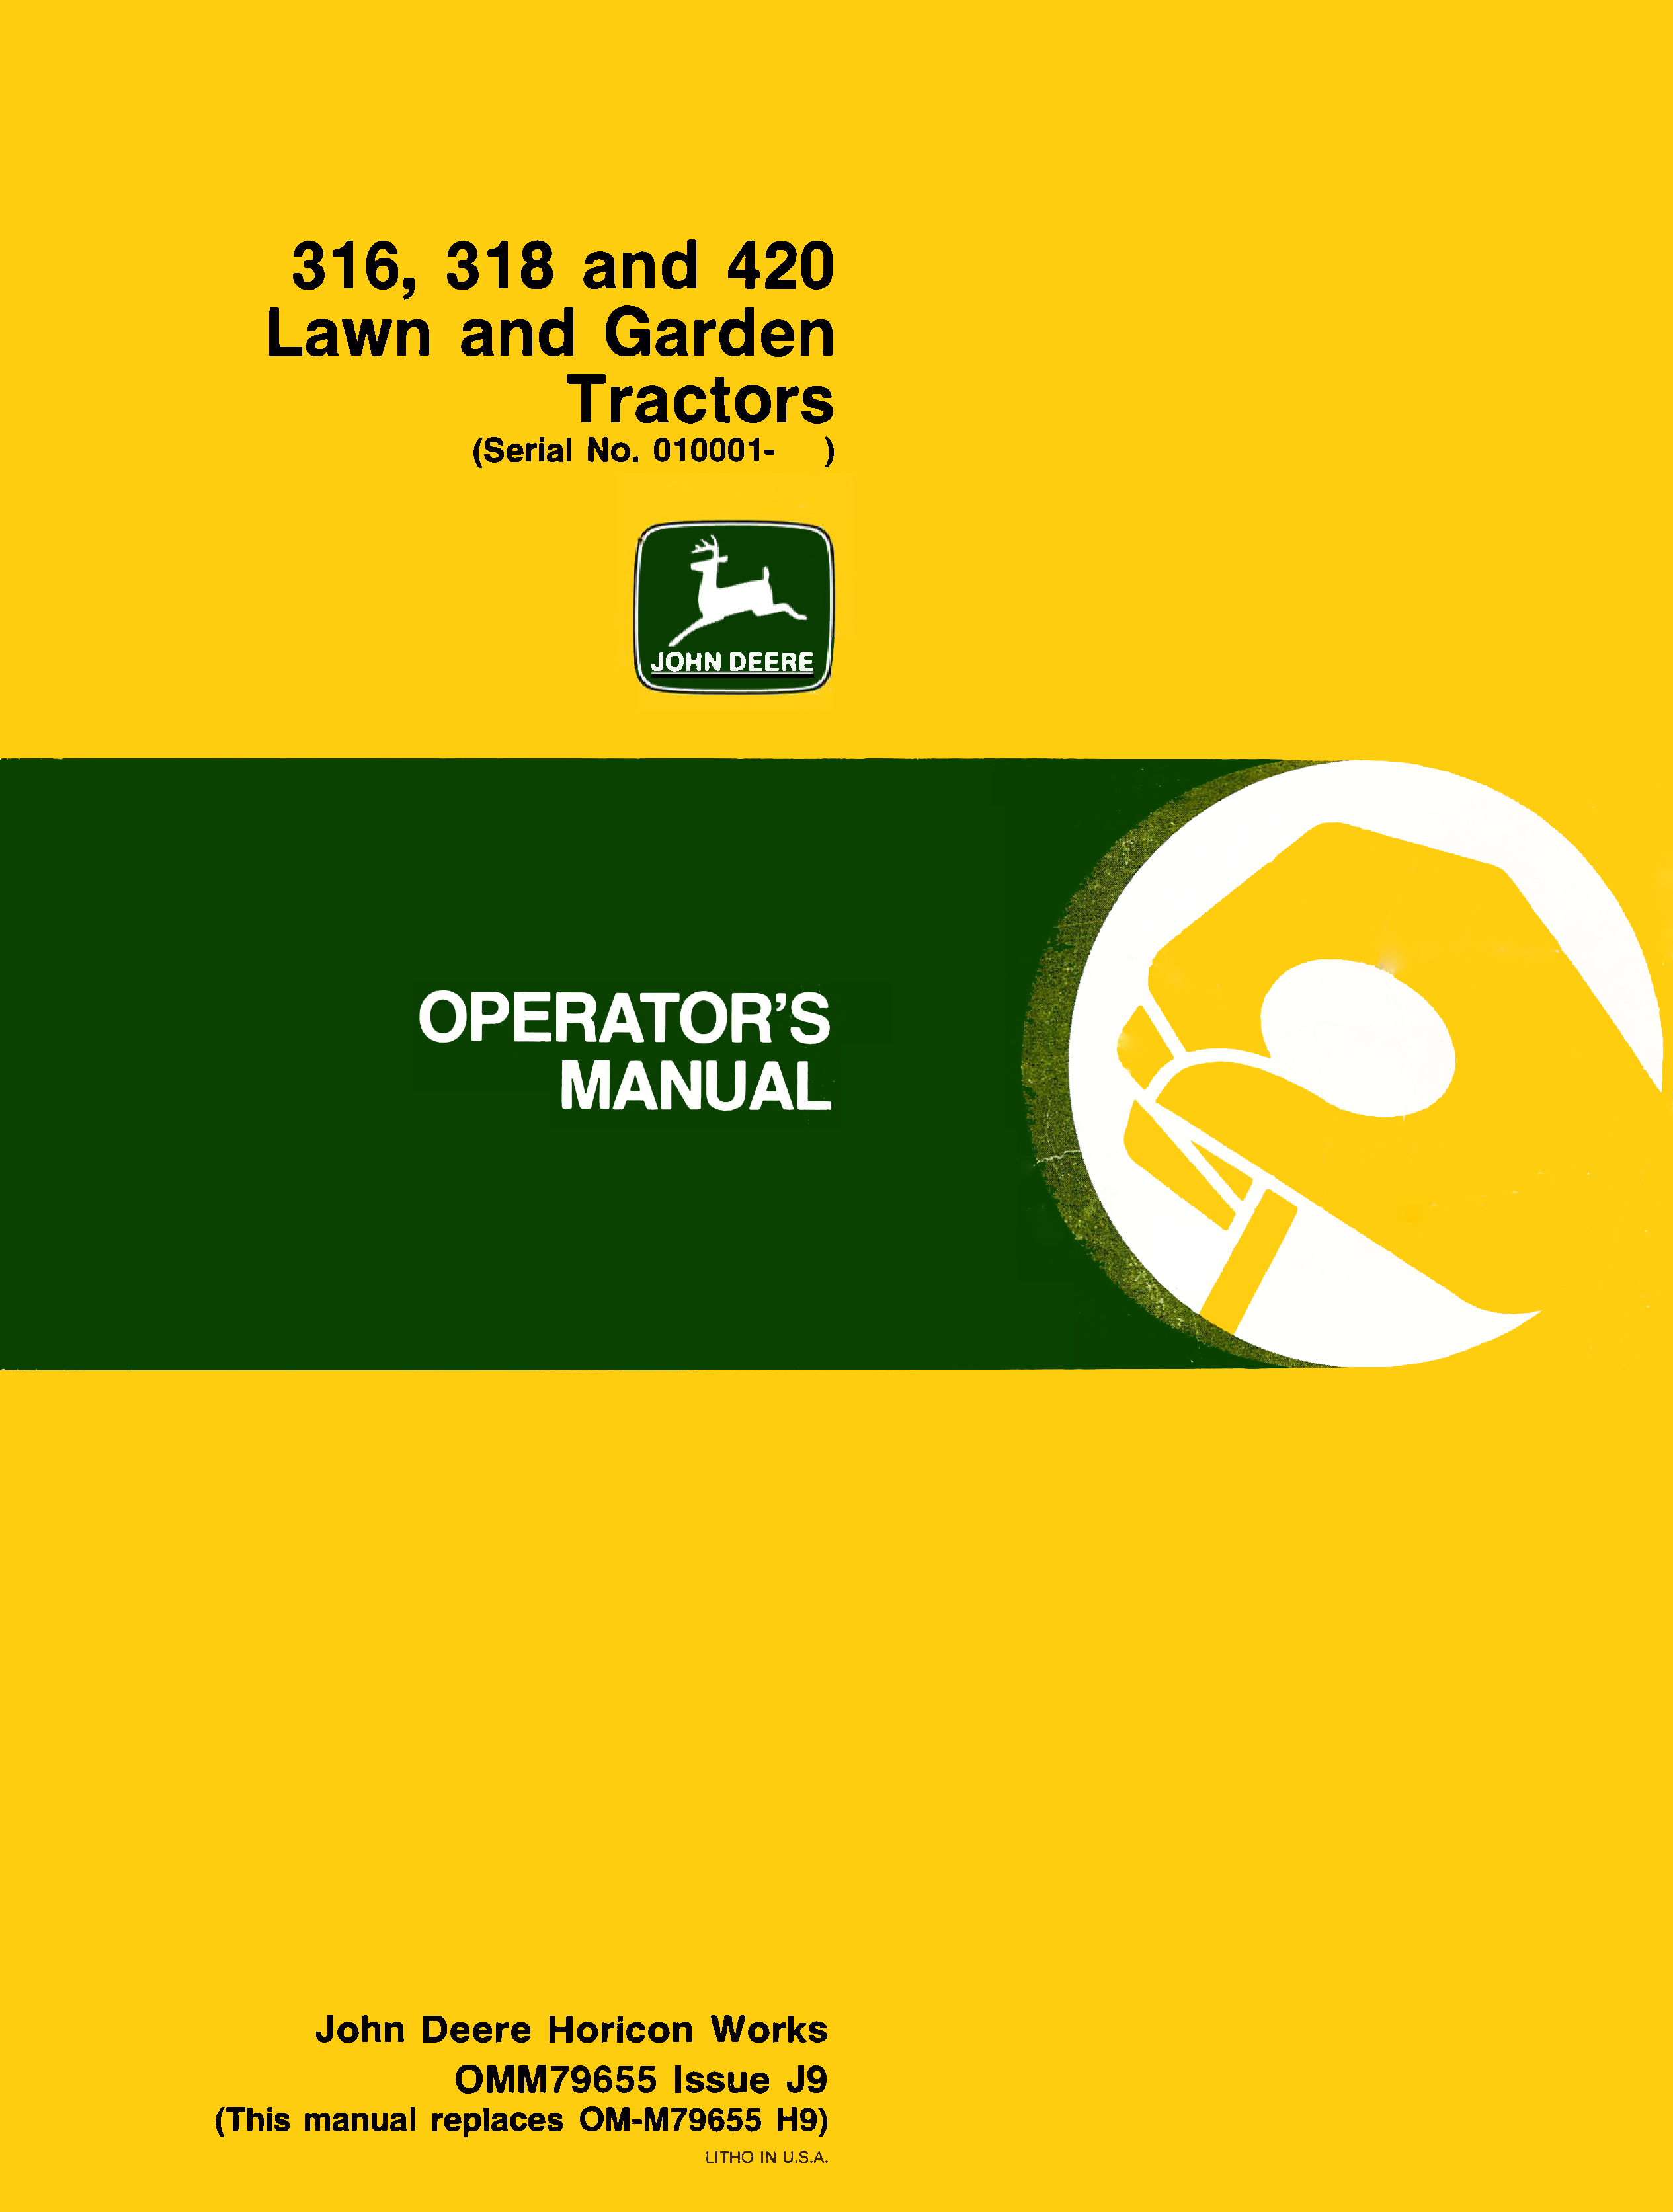 John Deere 316, 318 and 420 Lawn and Garden Tractors Operator's Manual